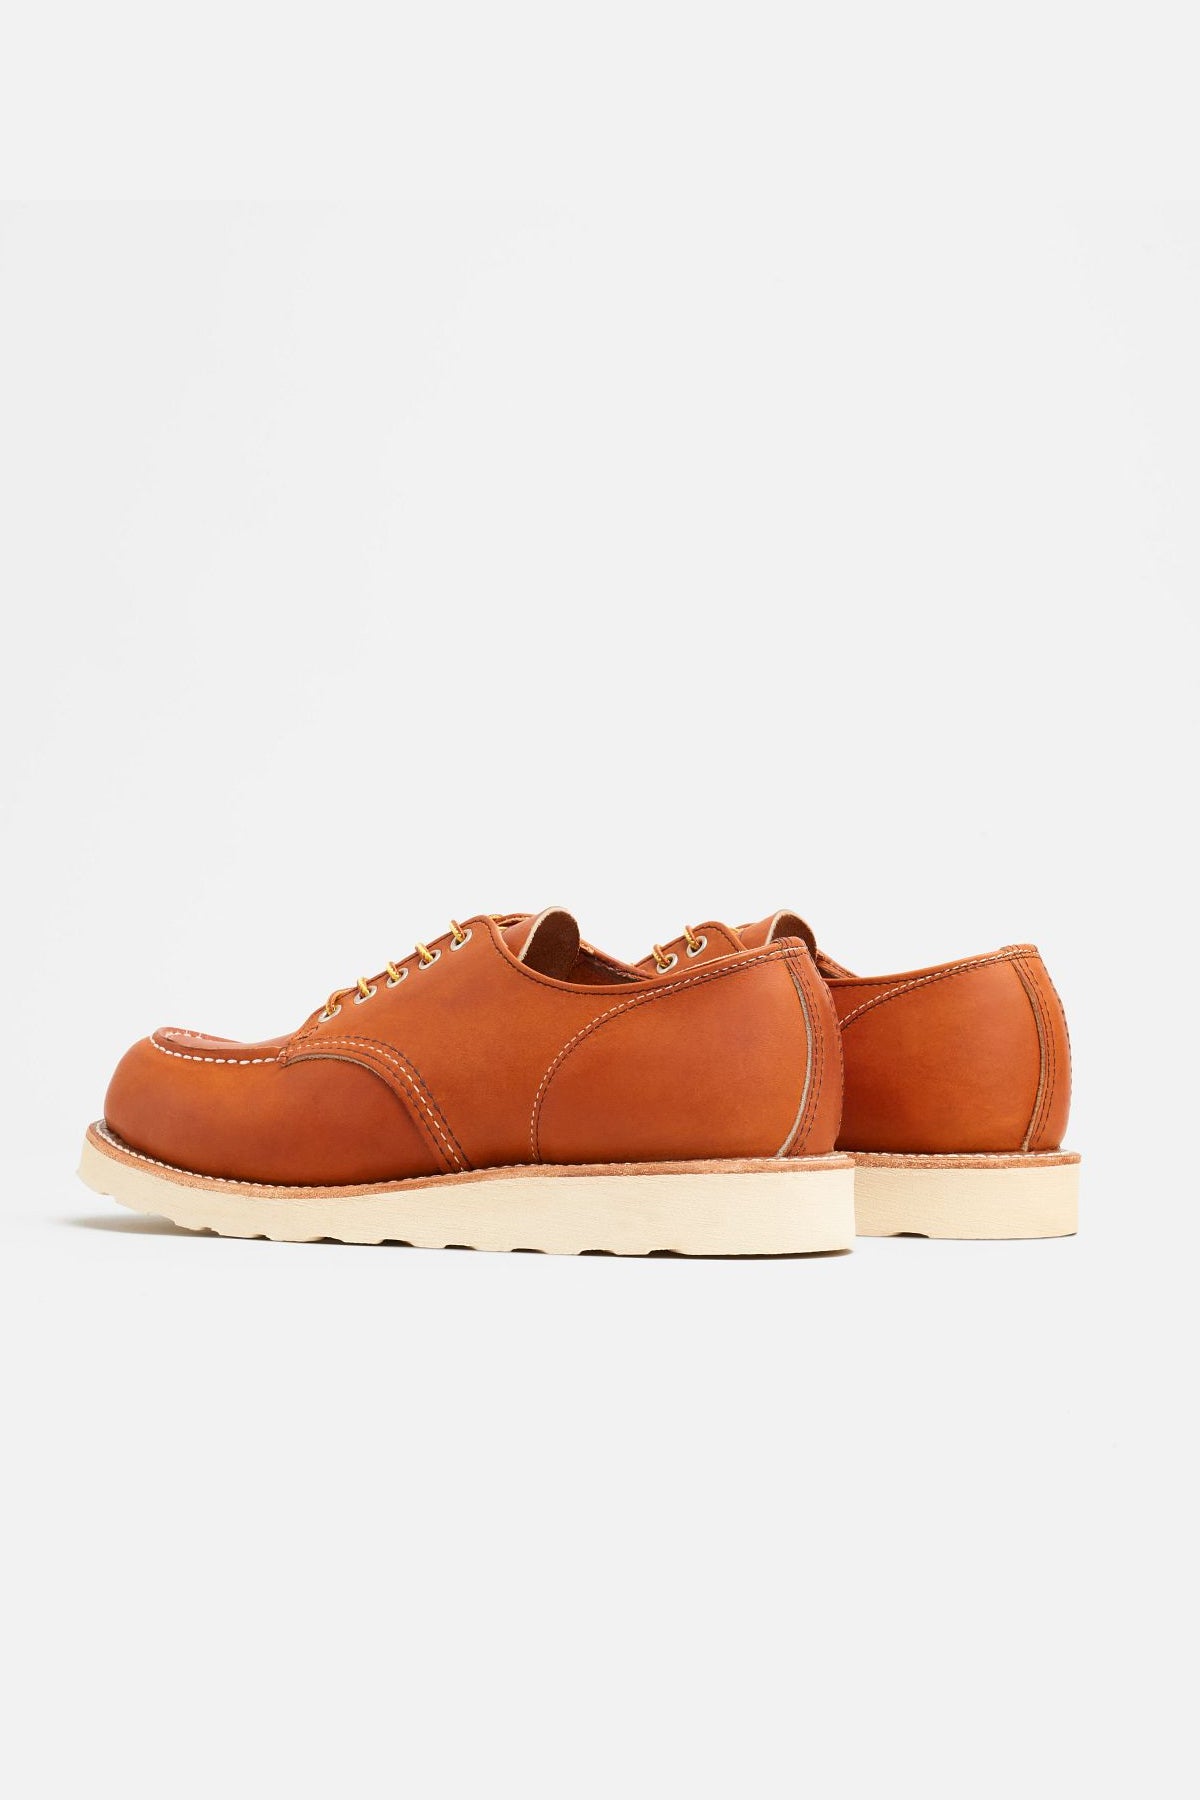 Men's Red Wing Heritage Shop Moc Oxford in Oro Legacy